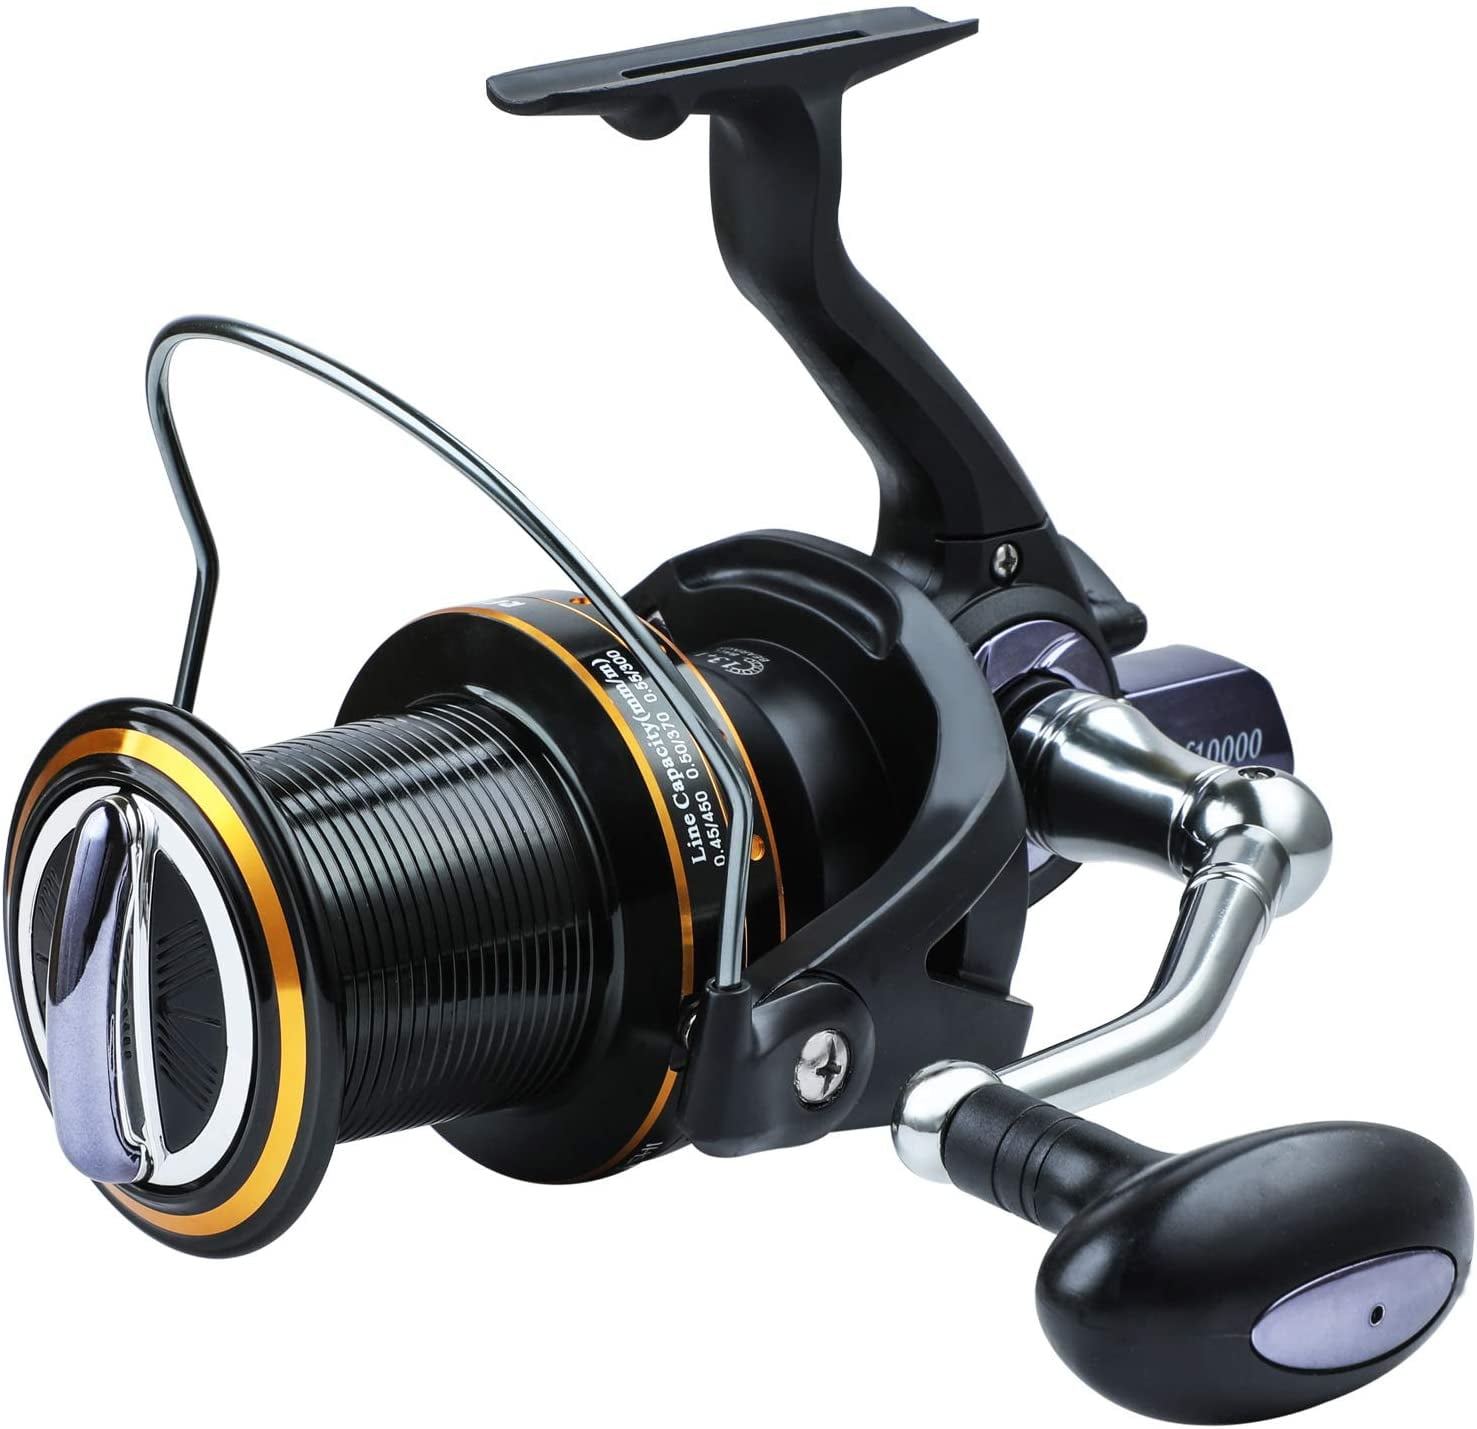 YUMOSHI Spinning Fishing Reels 12+1BB Ultra Lightweight Carved Aluminum Spool Reels Affordable Smooth Spinning Reels 3000 Series Black